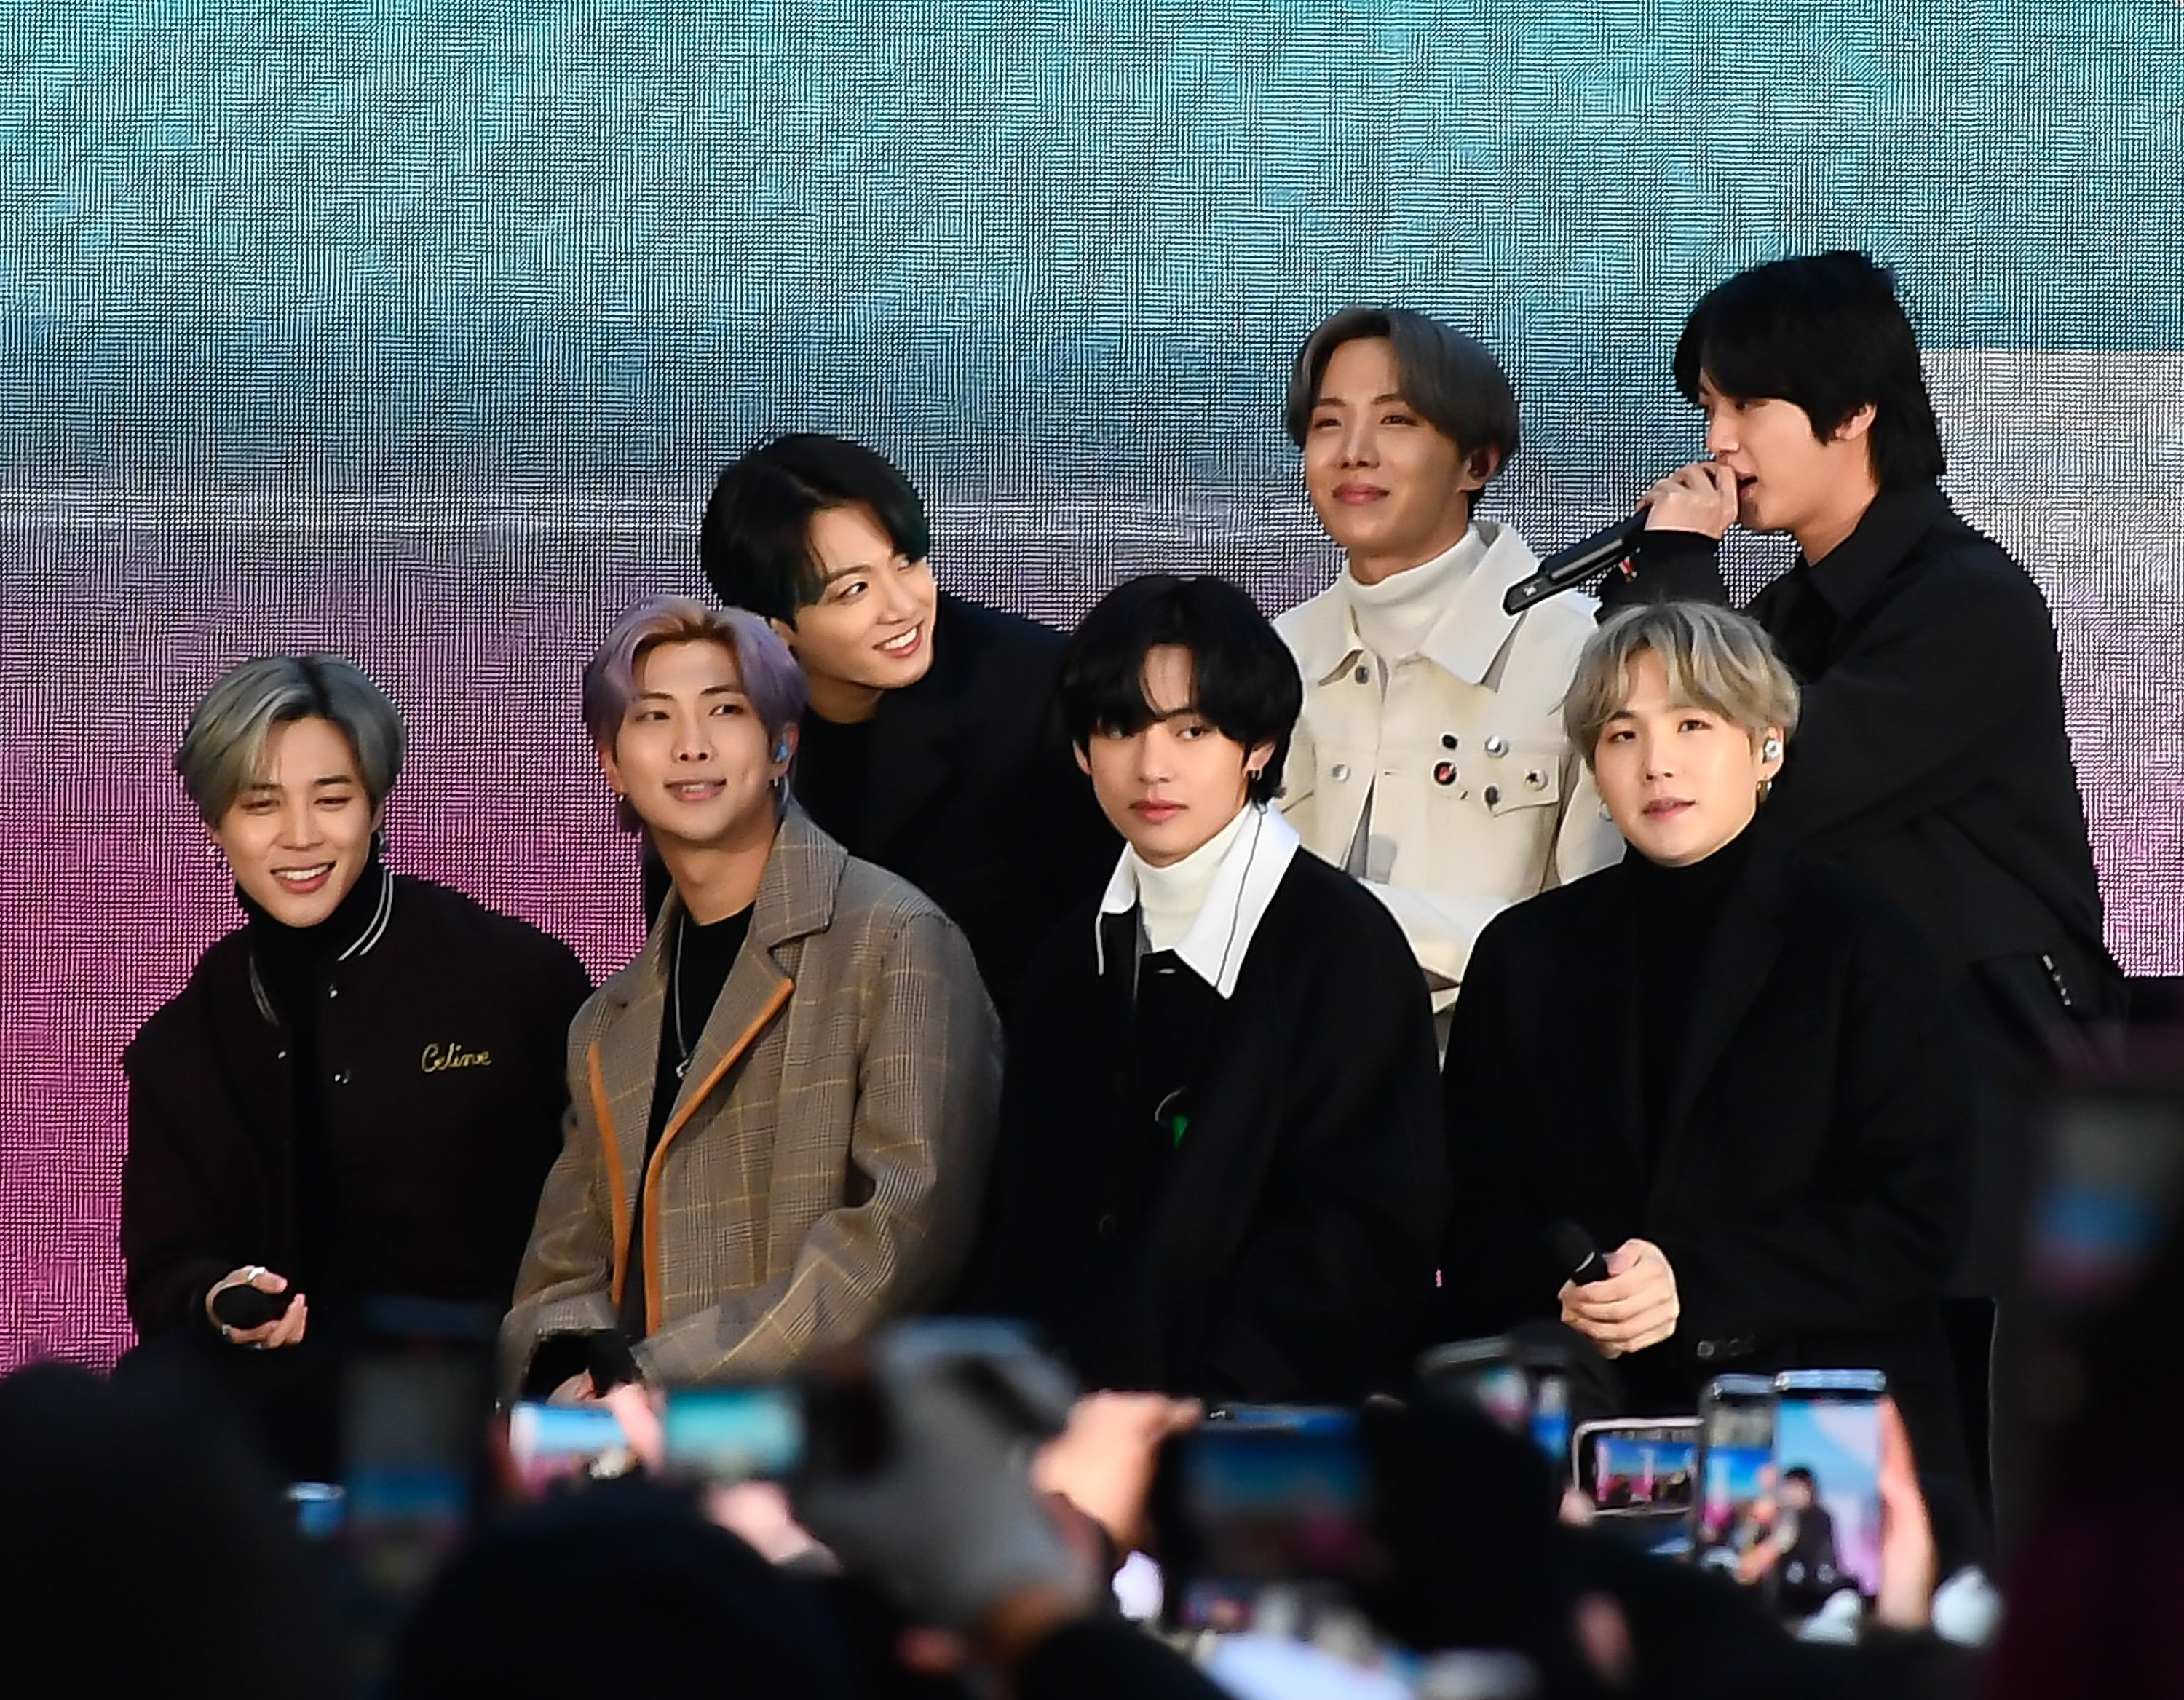 BTS on the 'Today' show in New York City dressed in winter coats, sitting together